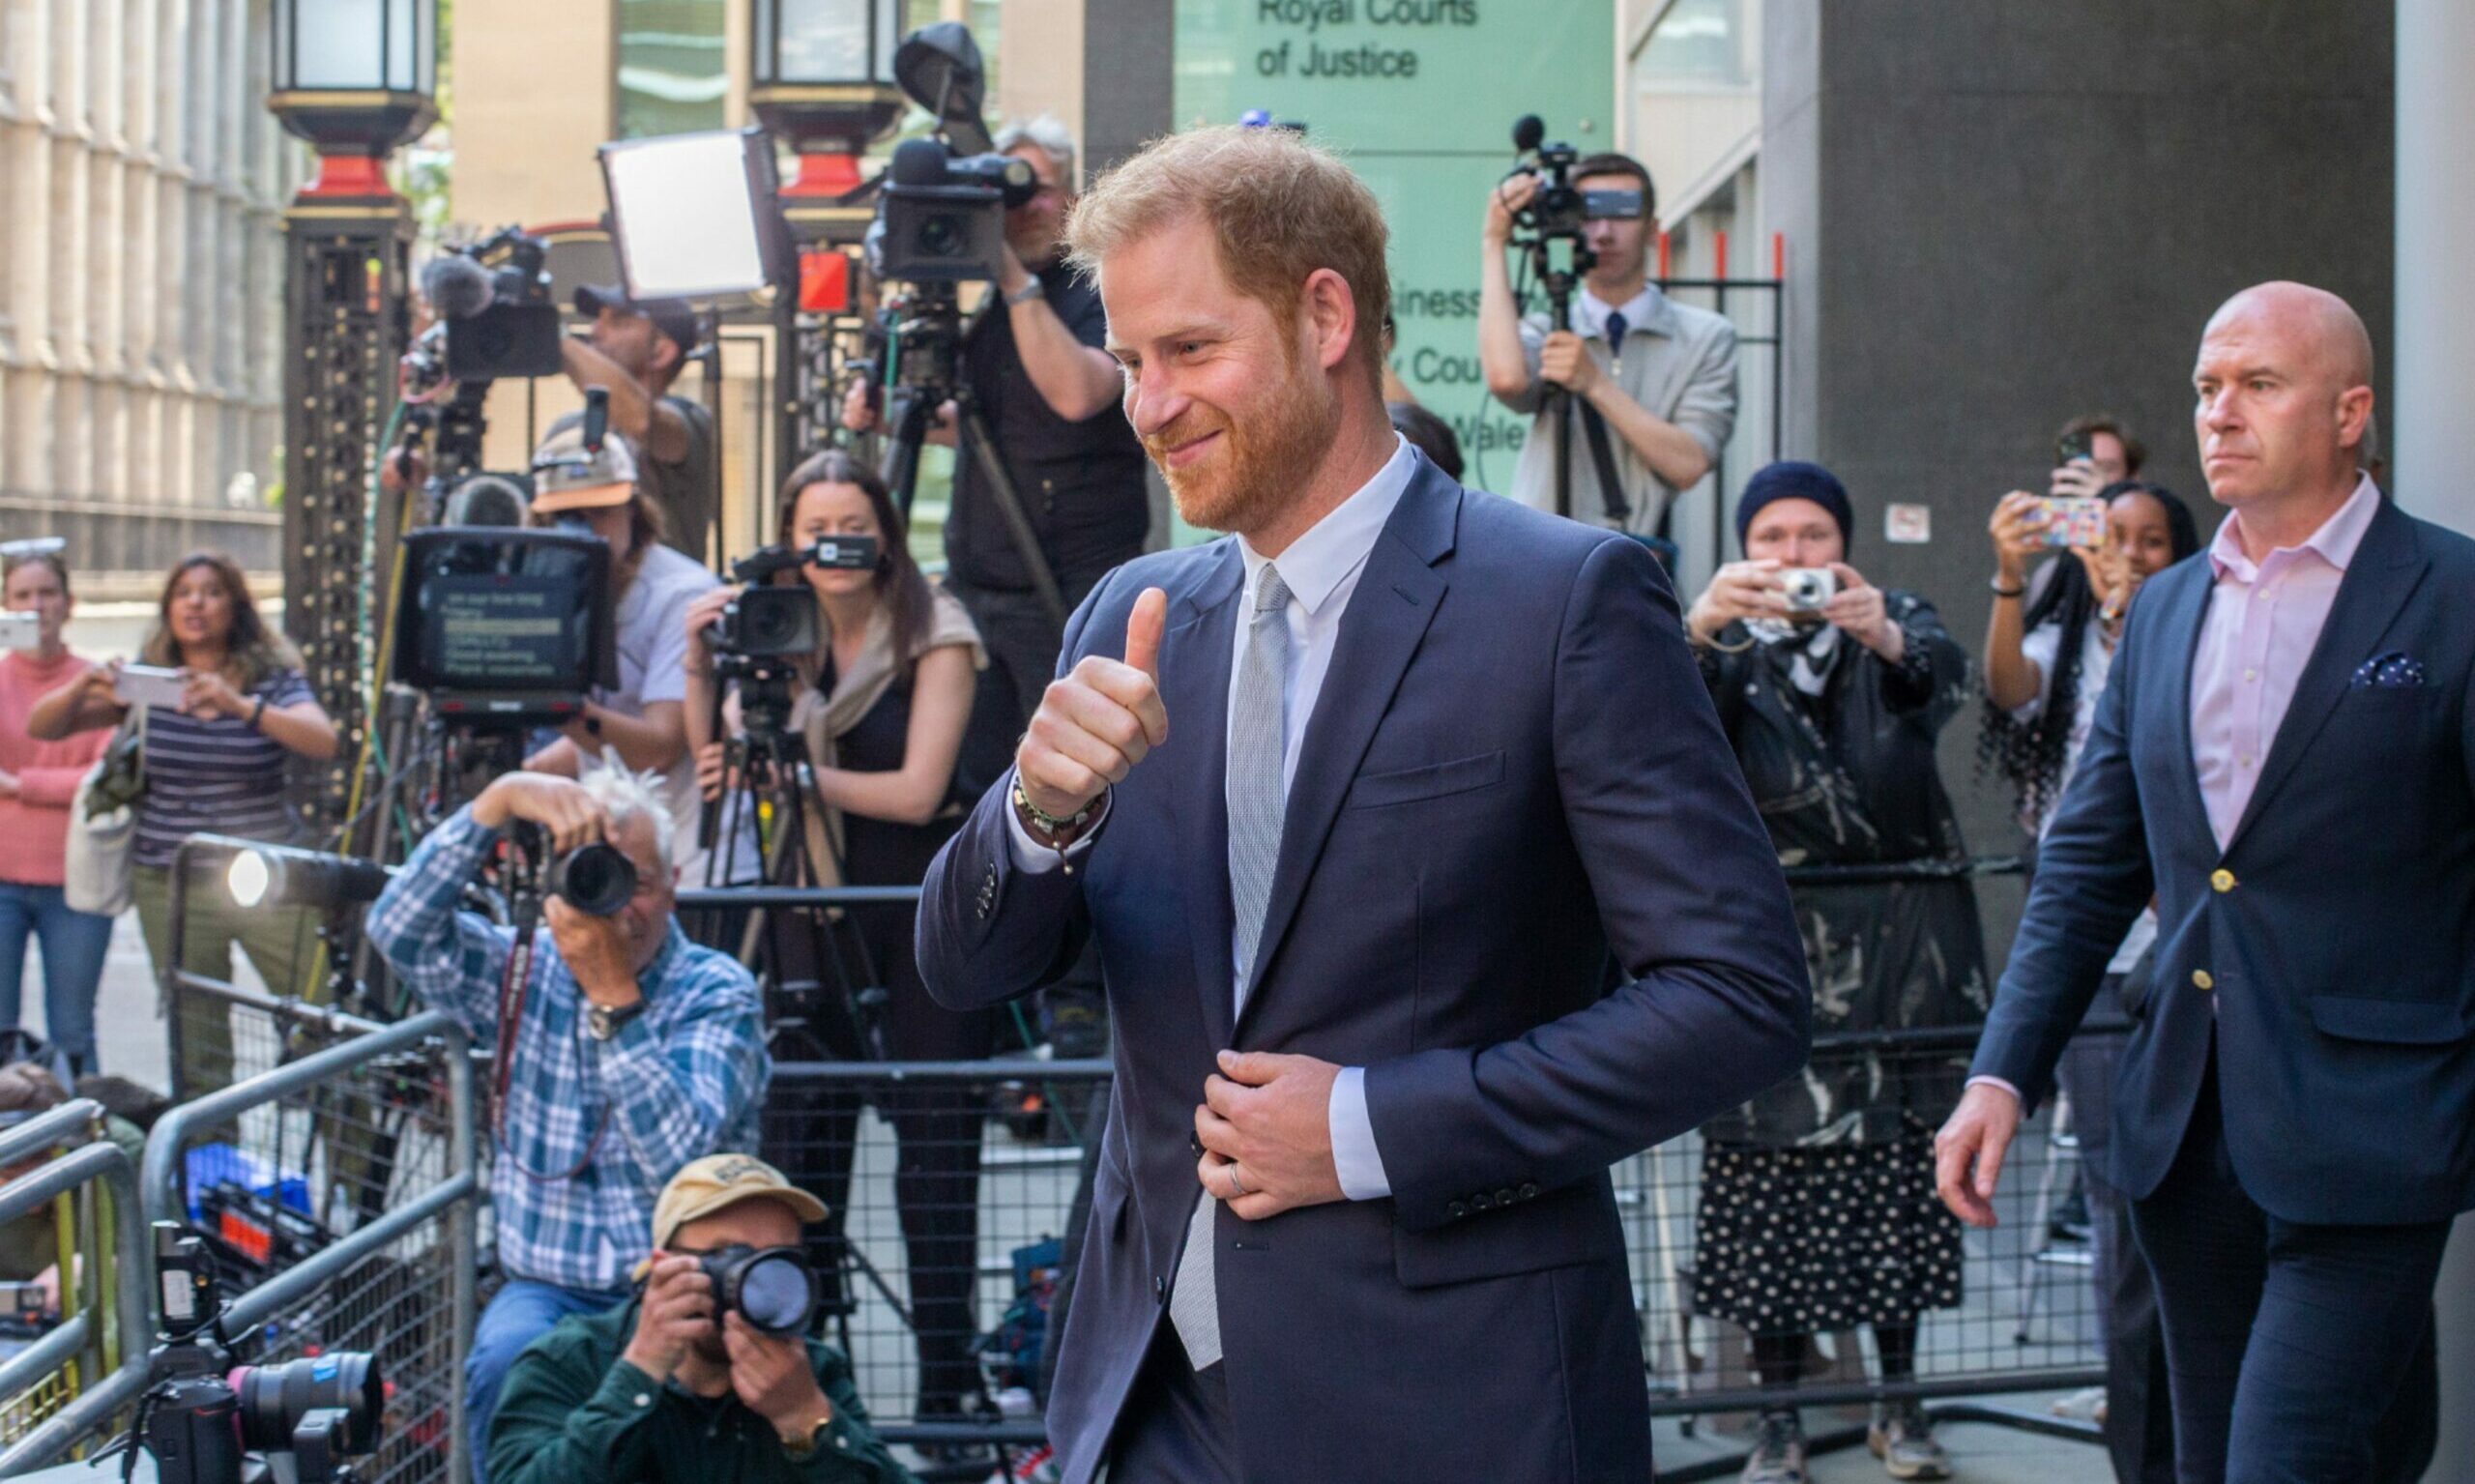 What a week: Prince Harry's evidence at hacking trial, inflation to remain sticky and costly AR headsets